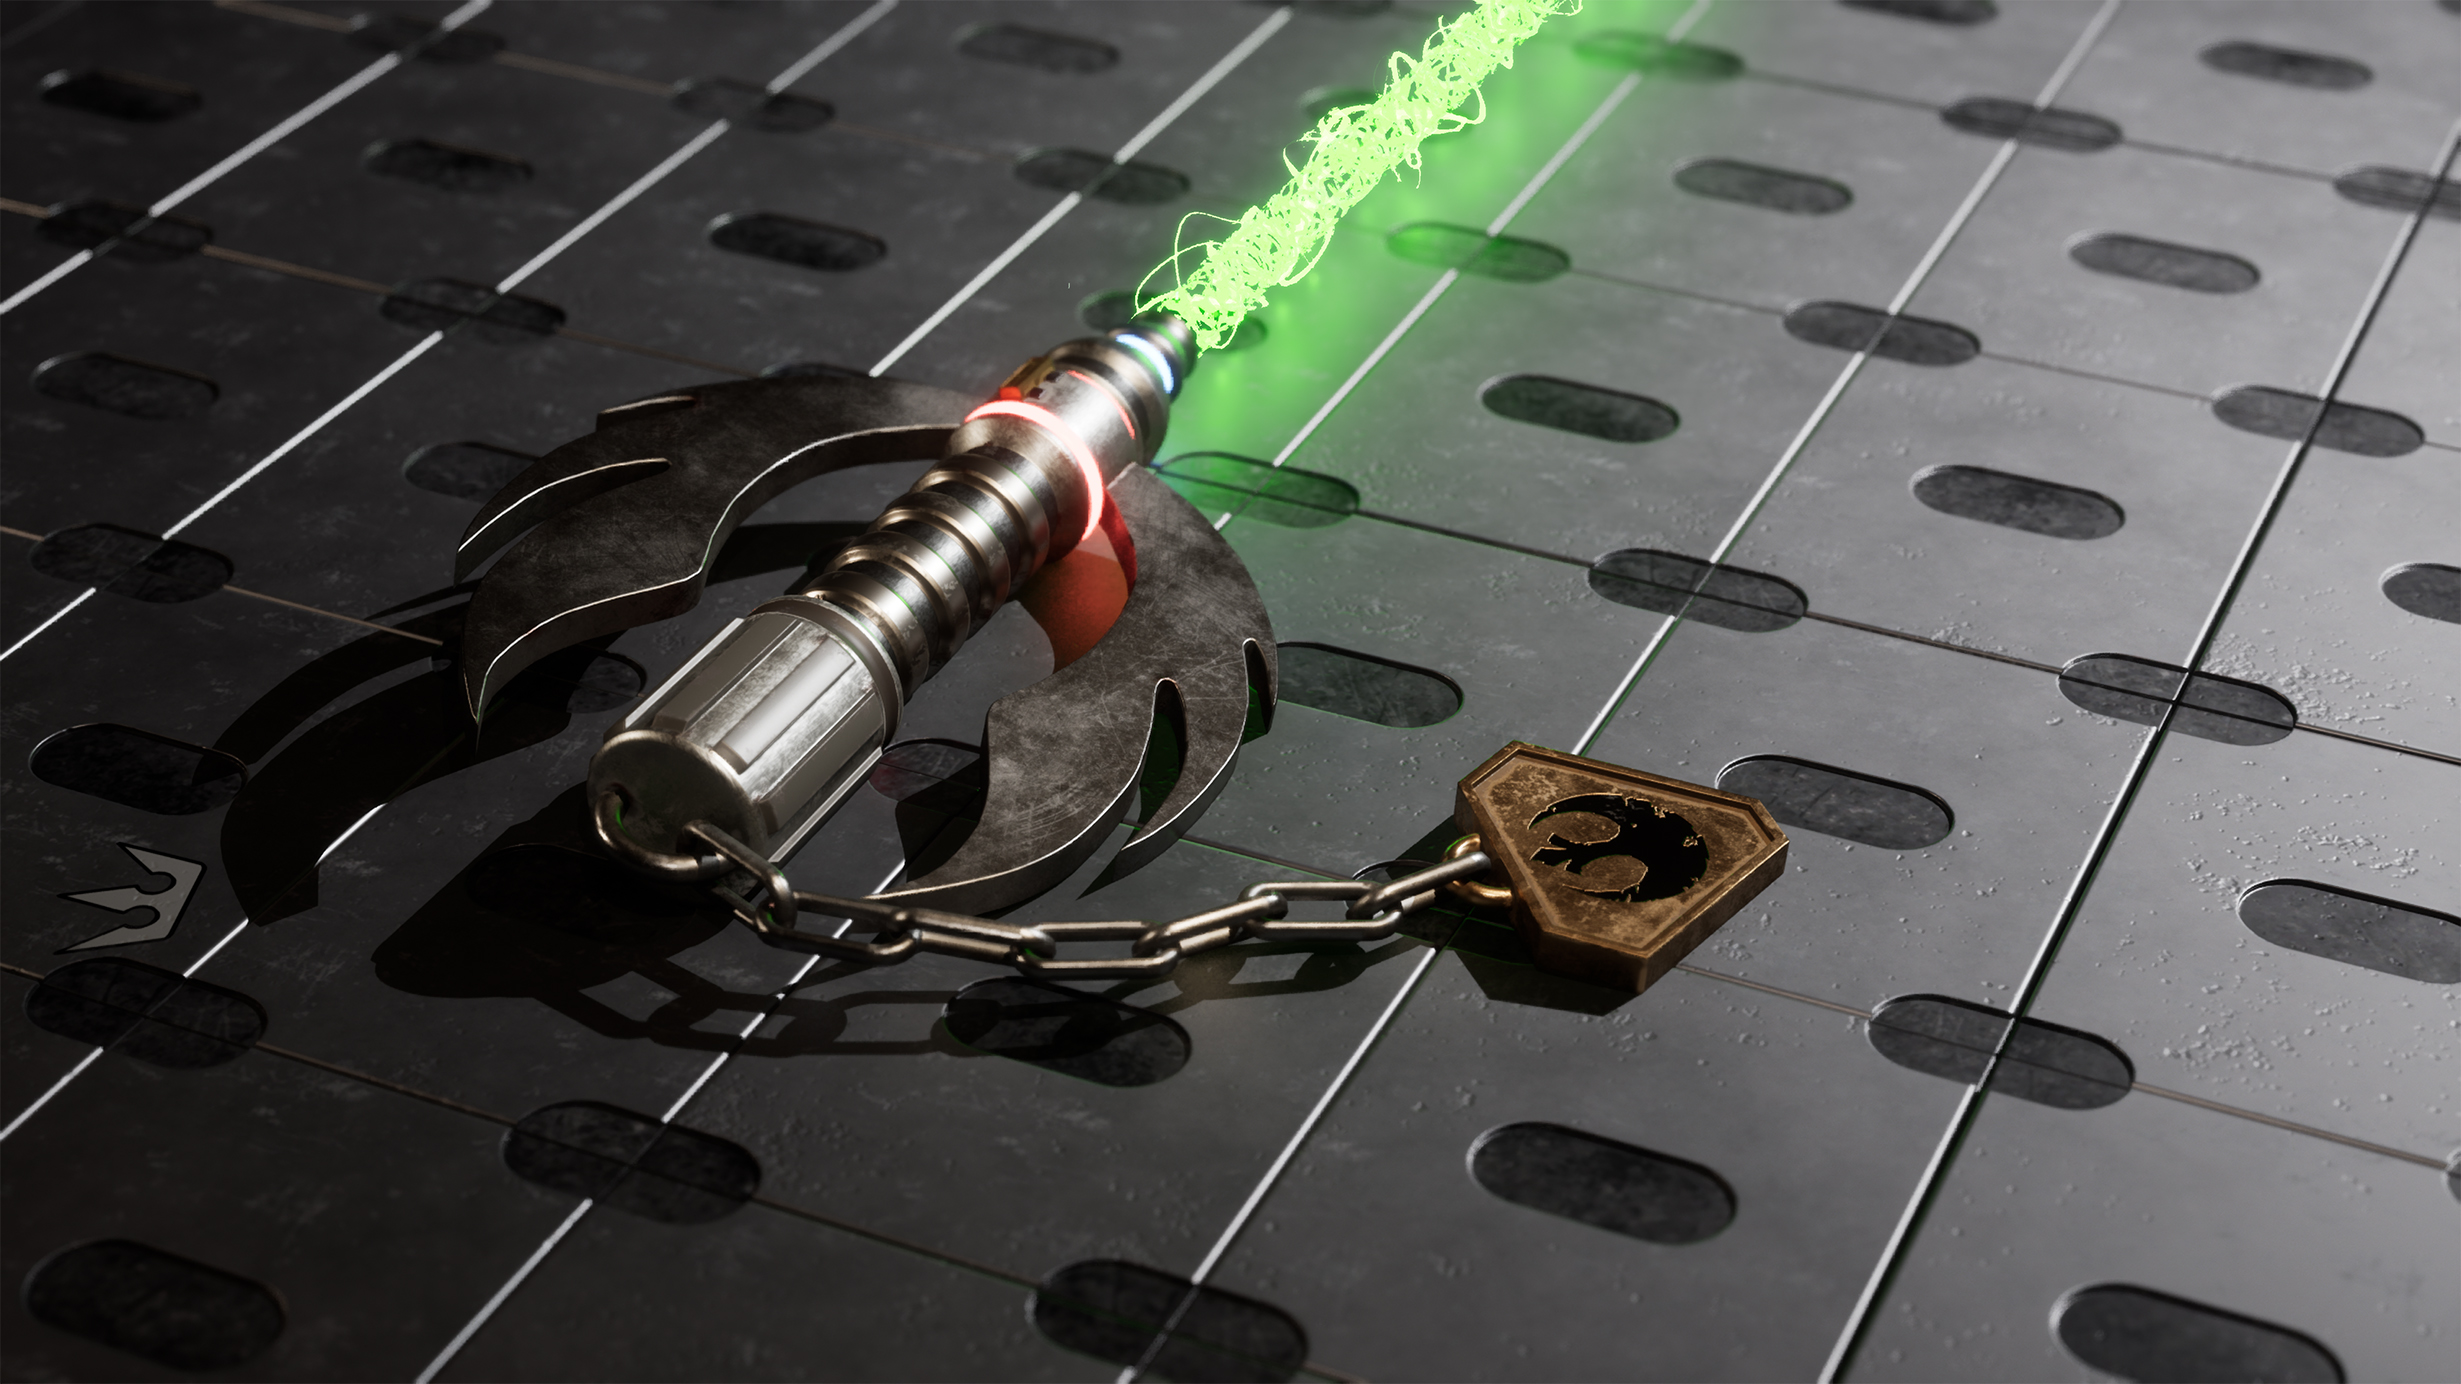 An energy-based sword with the "rebel" faction on a keychain and green glowing blade.